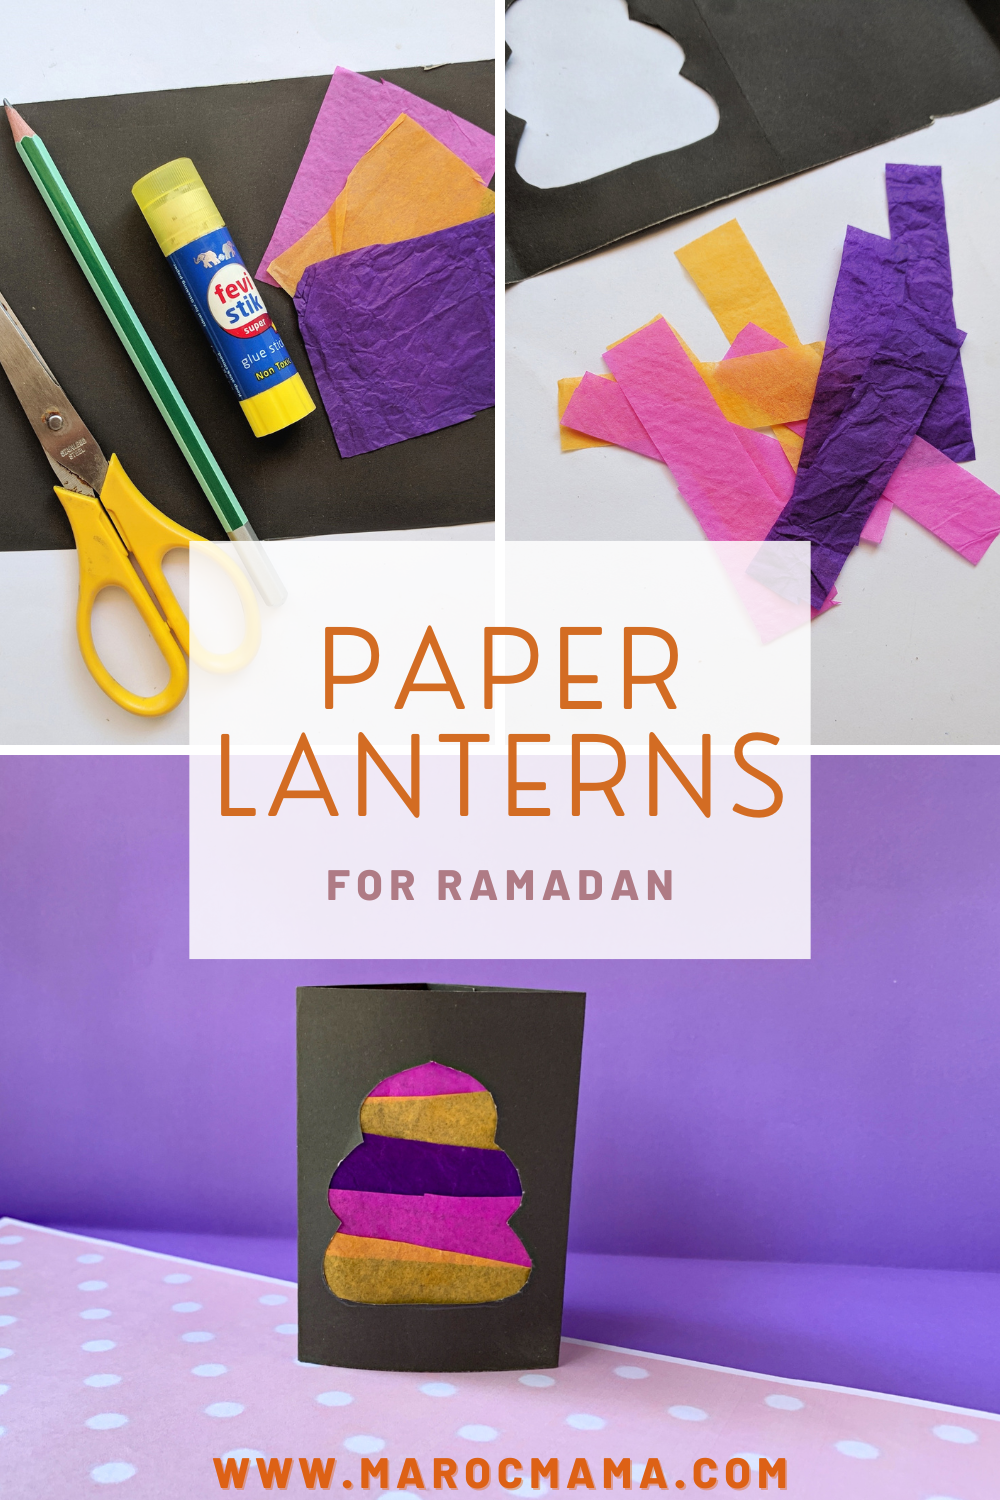 materials and finished product of paper lanterns for Ramadan